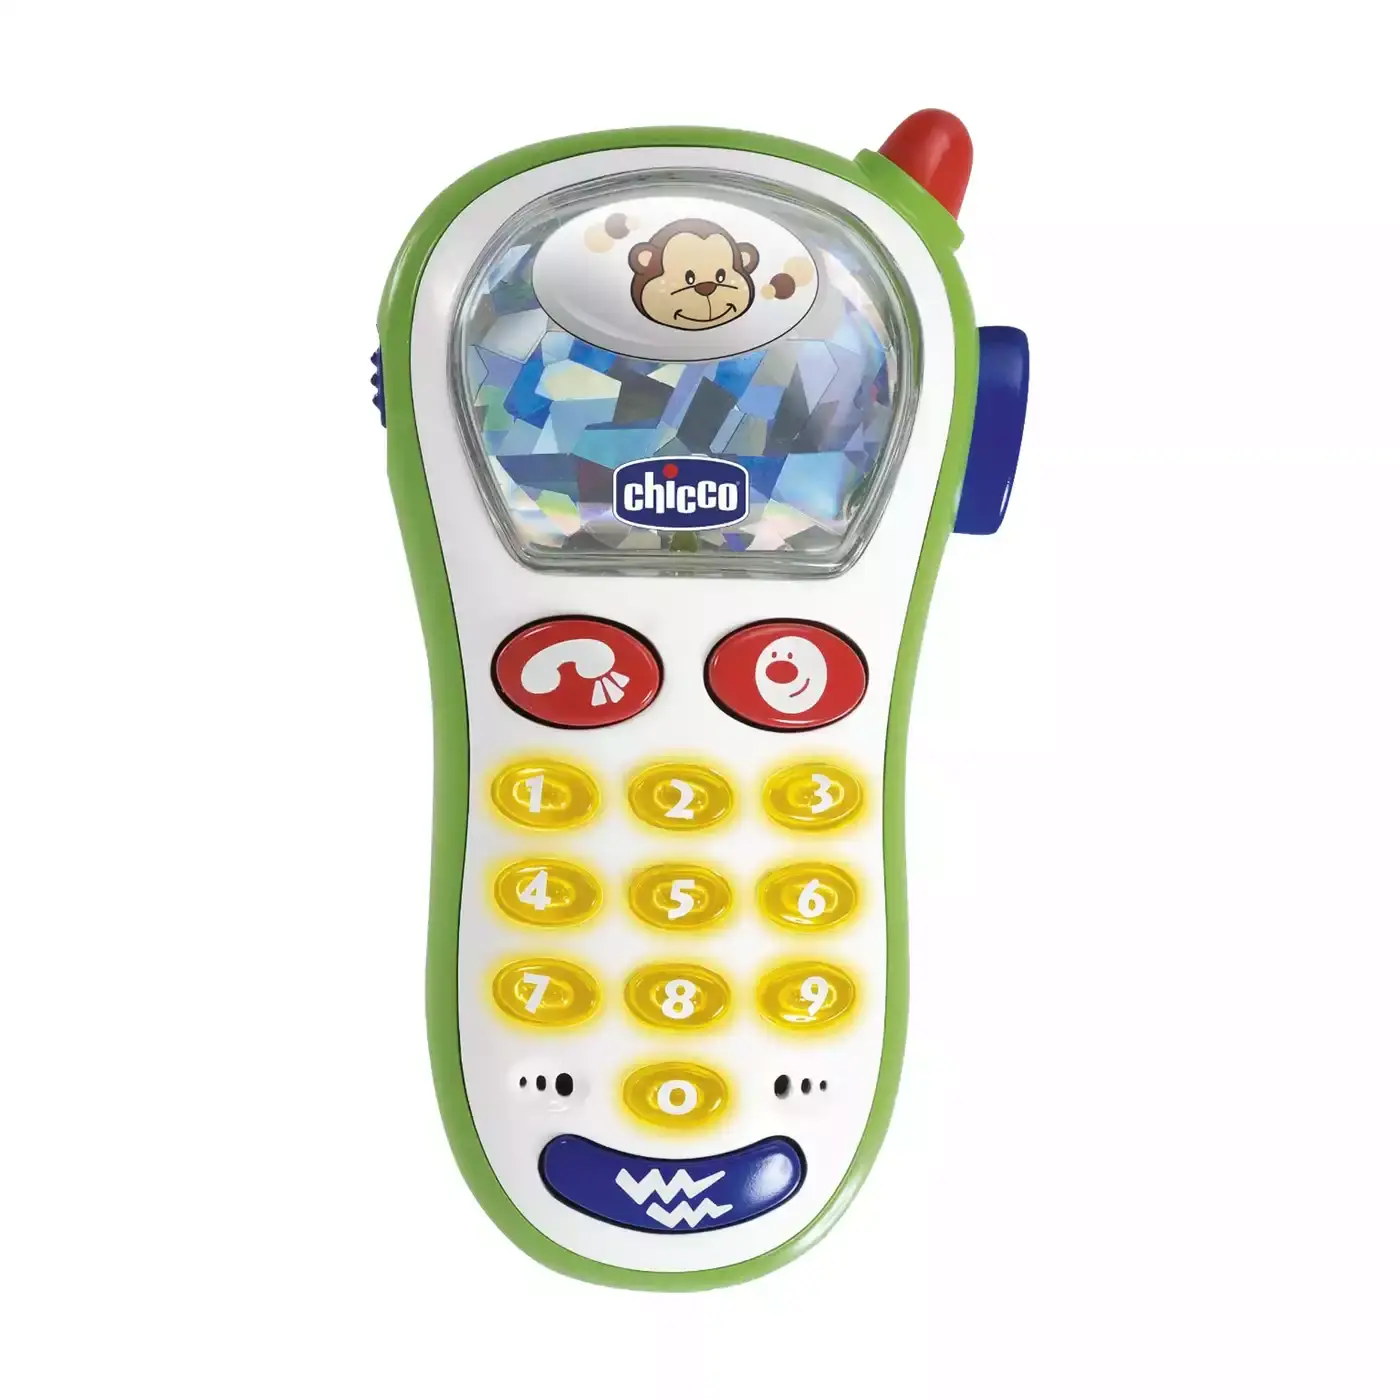 Baby's Fotohandy chicco Mehrfarbig 2000555079306 1